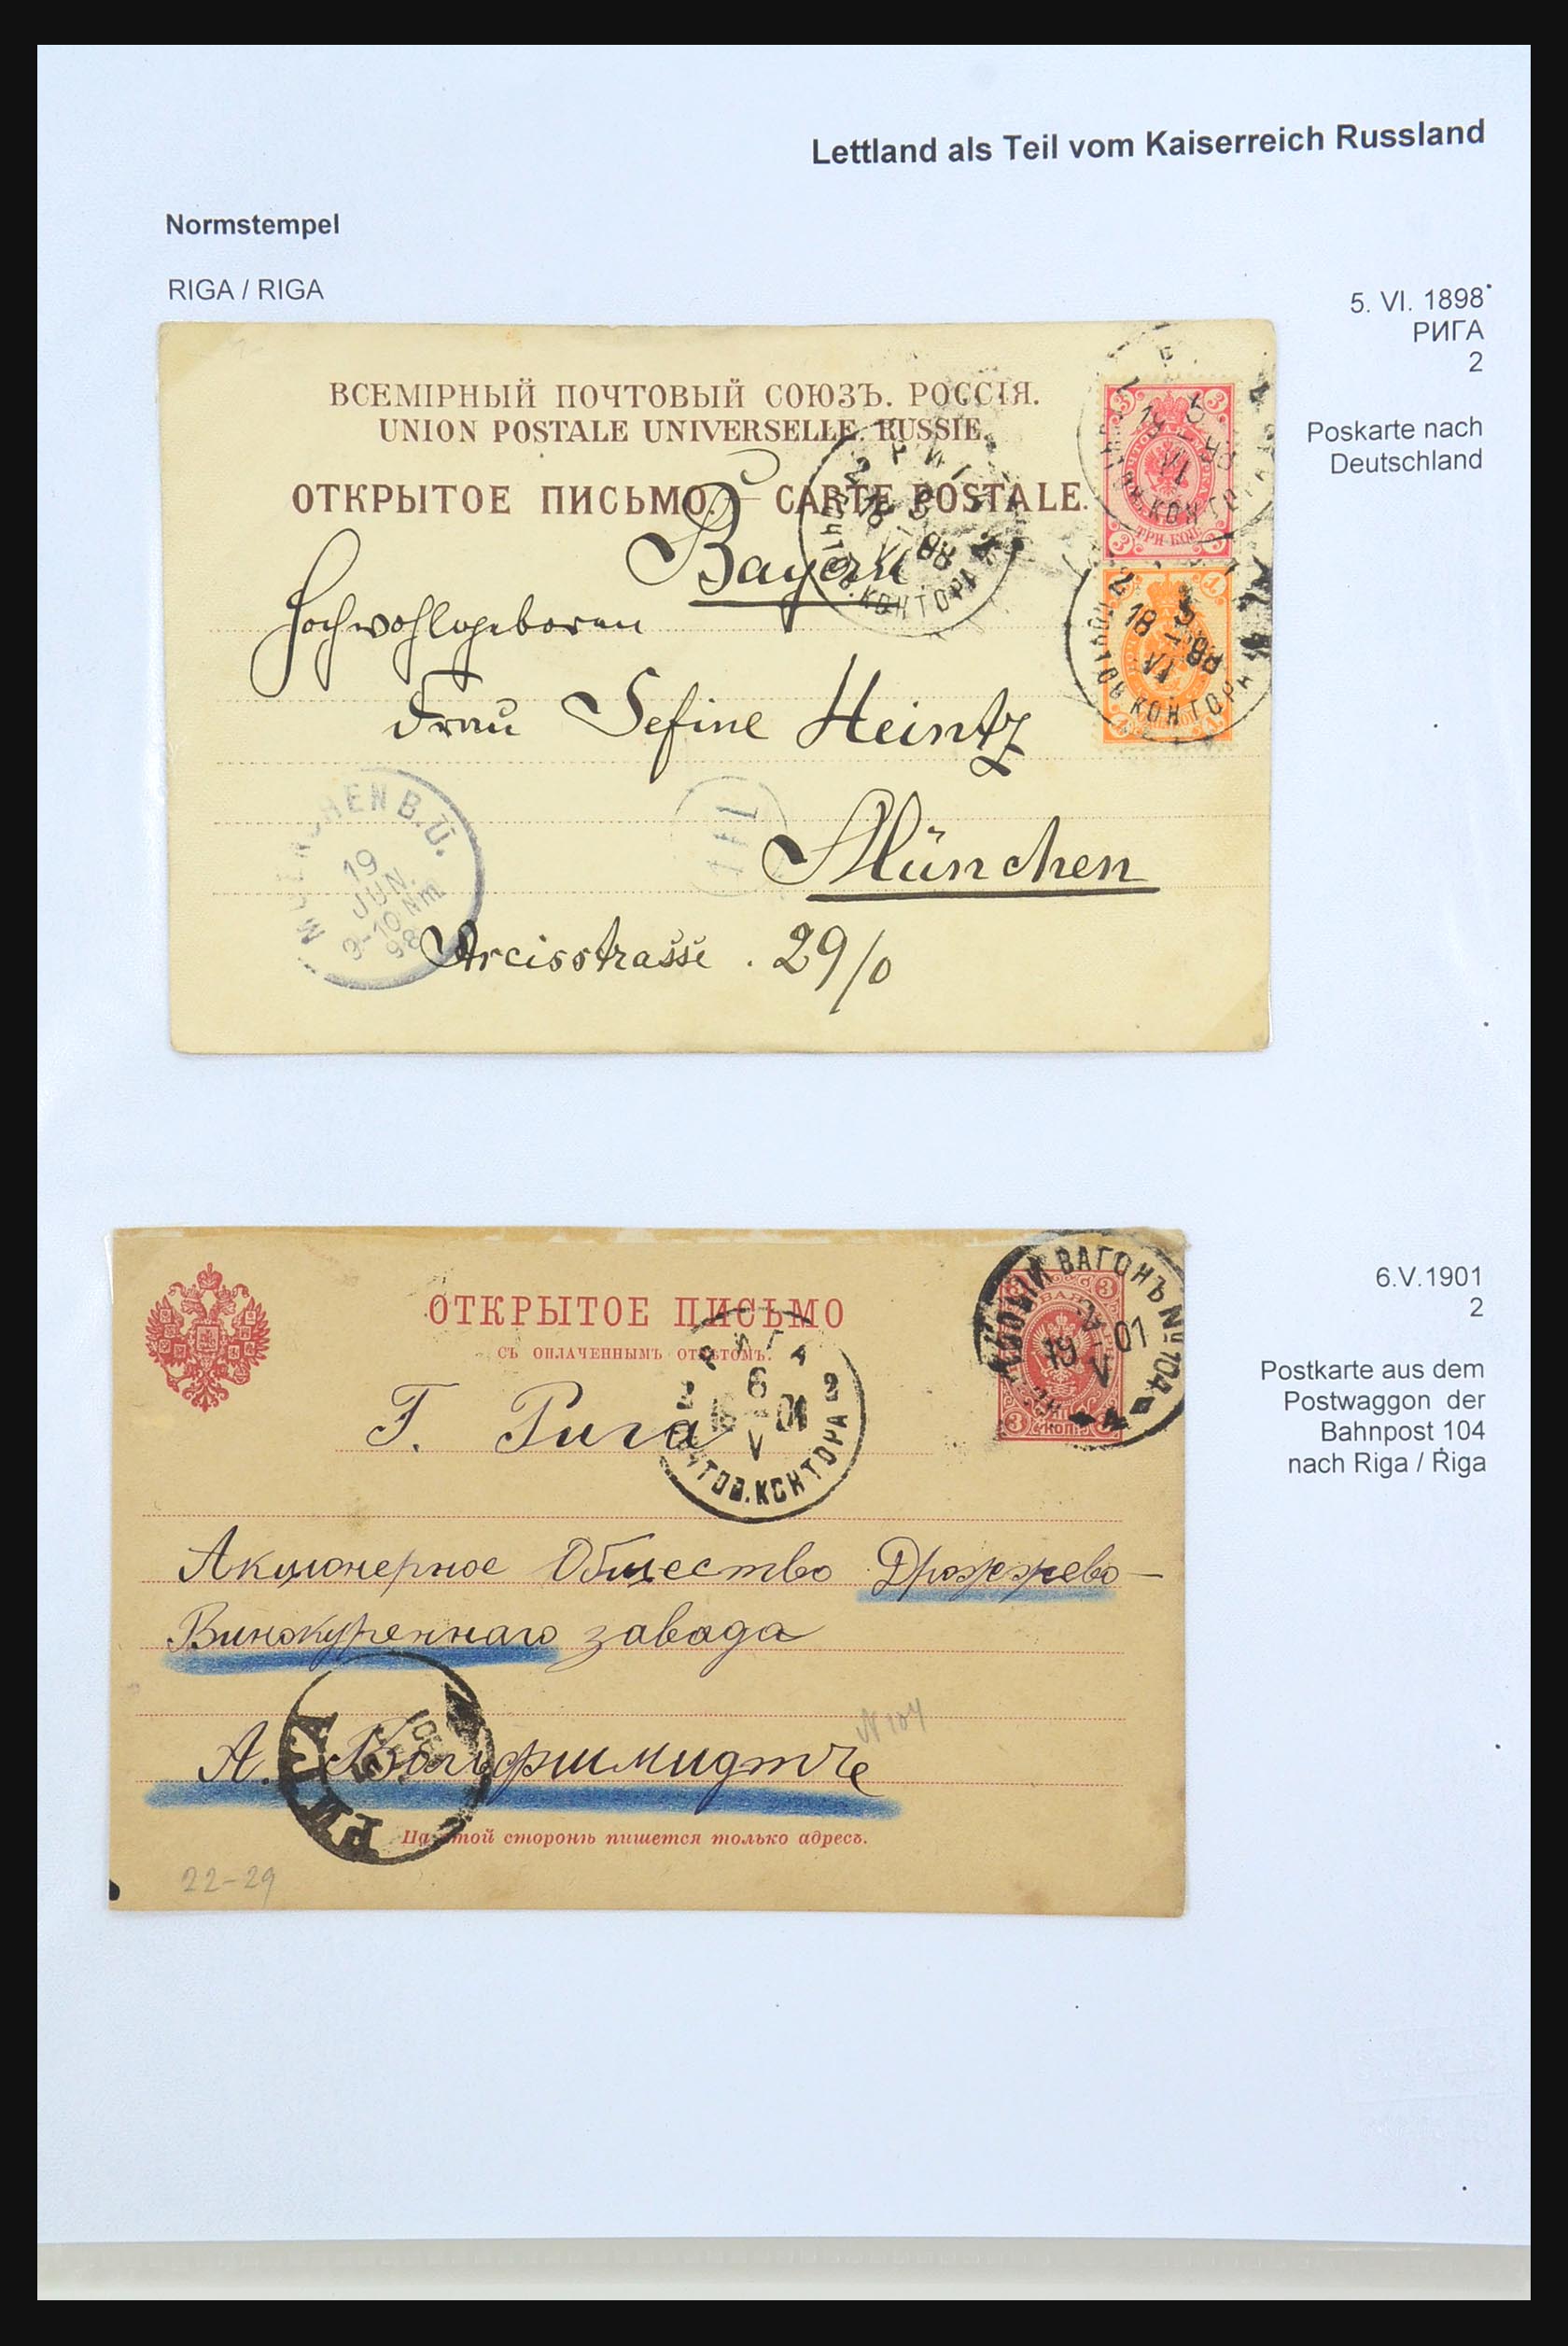 31305 038 - 31305 Latvia as part of Russia 1817-1918.